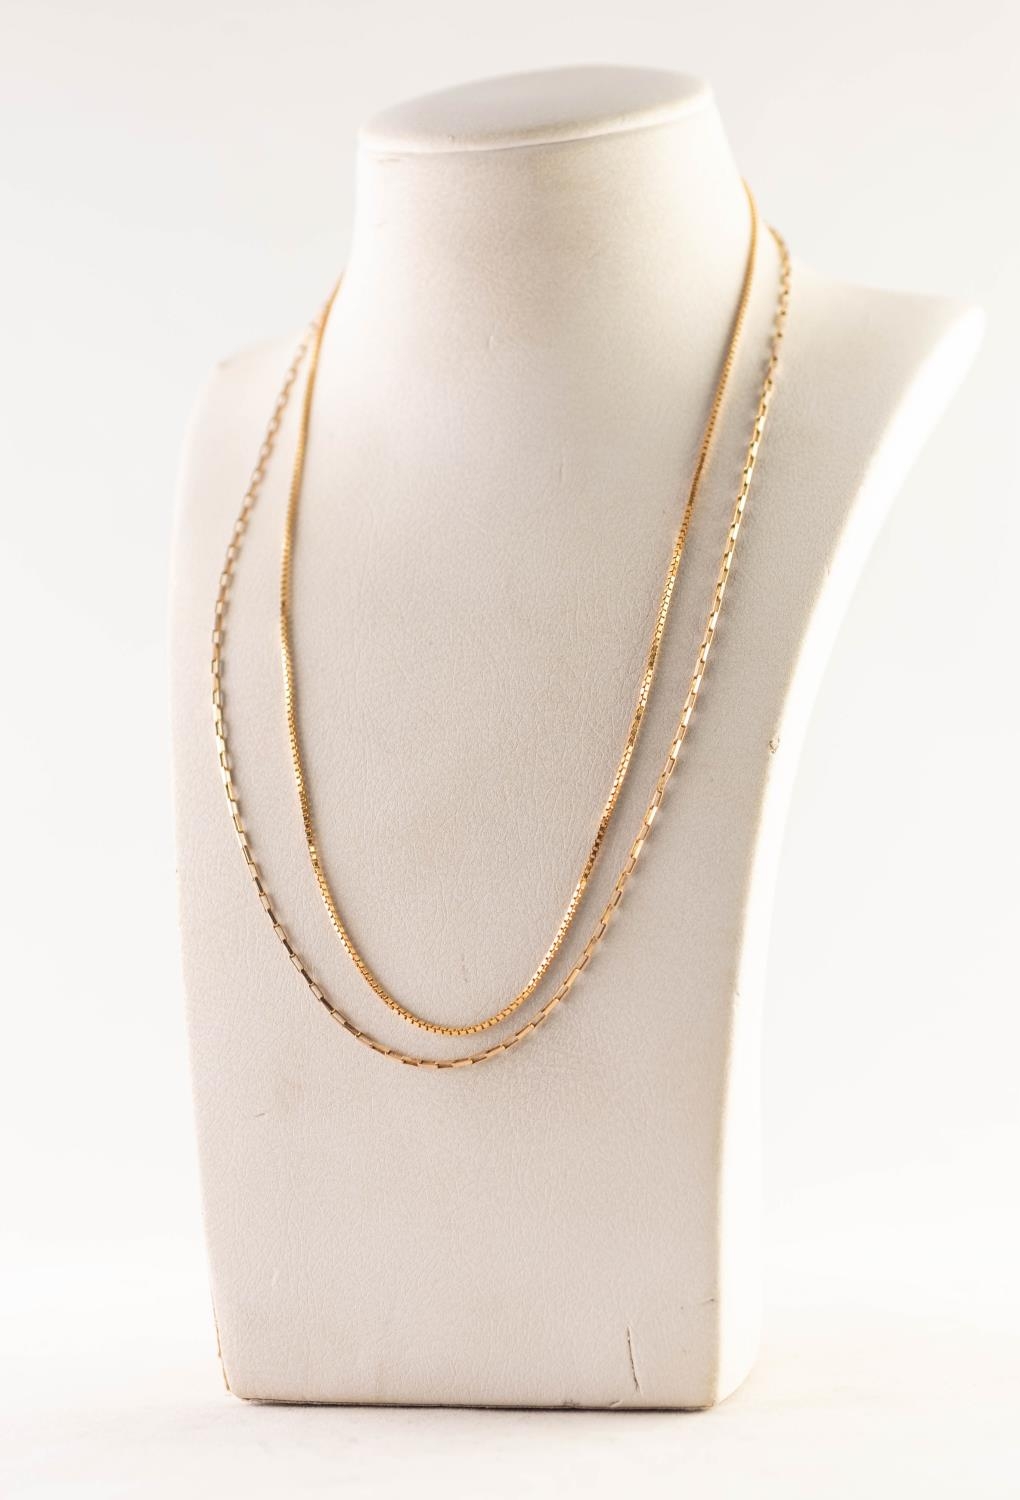 9ct GOLD FINE CHAIN NECKLACE with oblong links and ring clasp, 16 1/2in (42cm) long and a 9ct GOLD